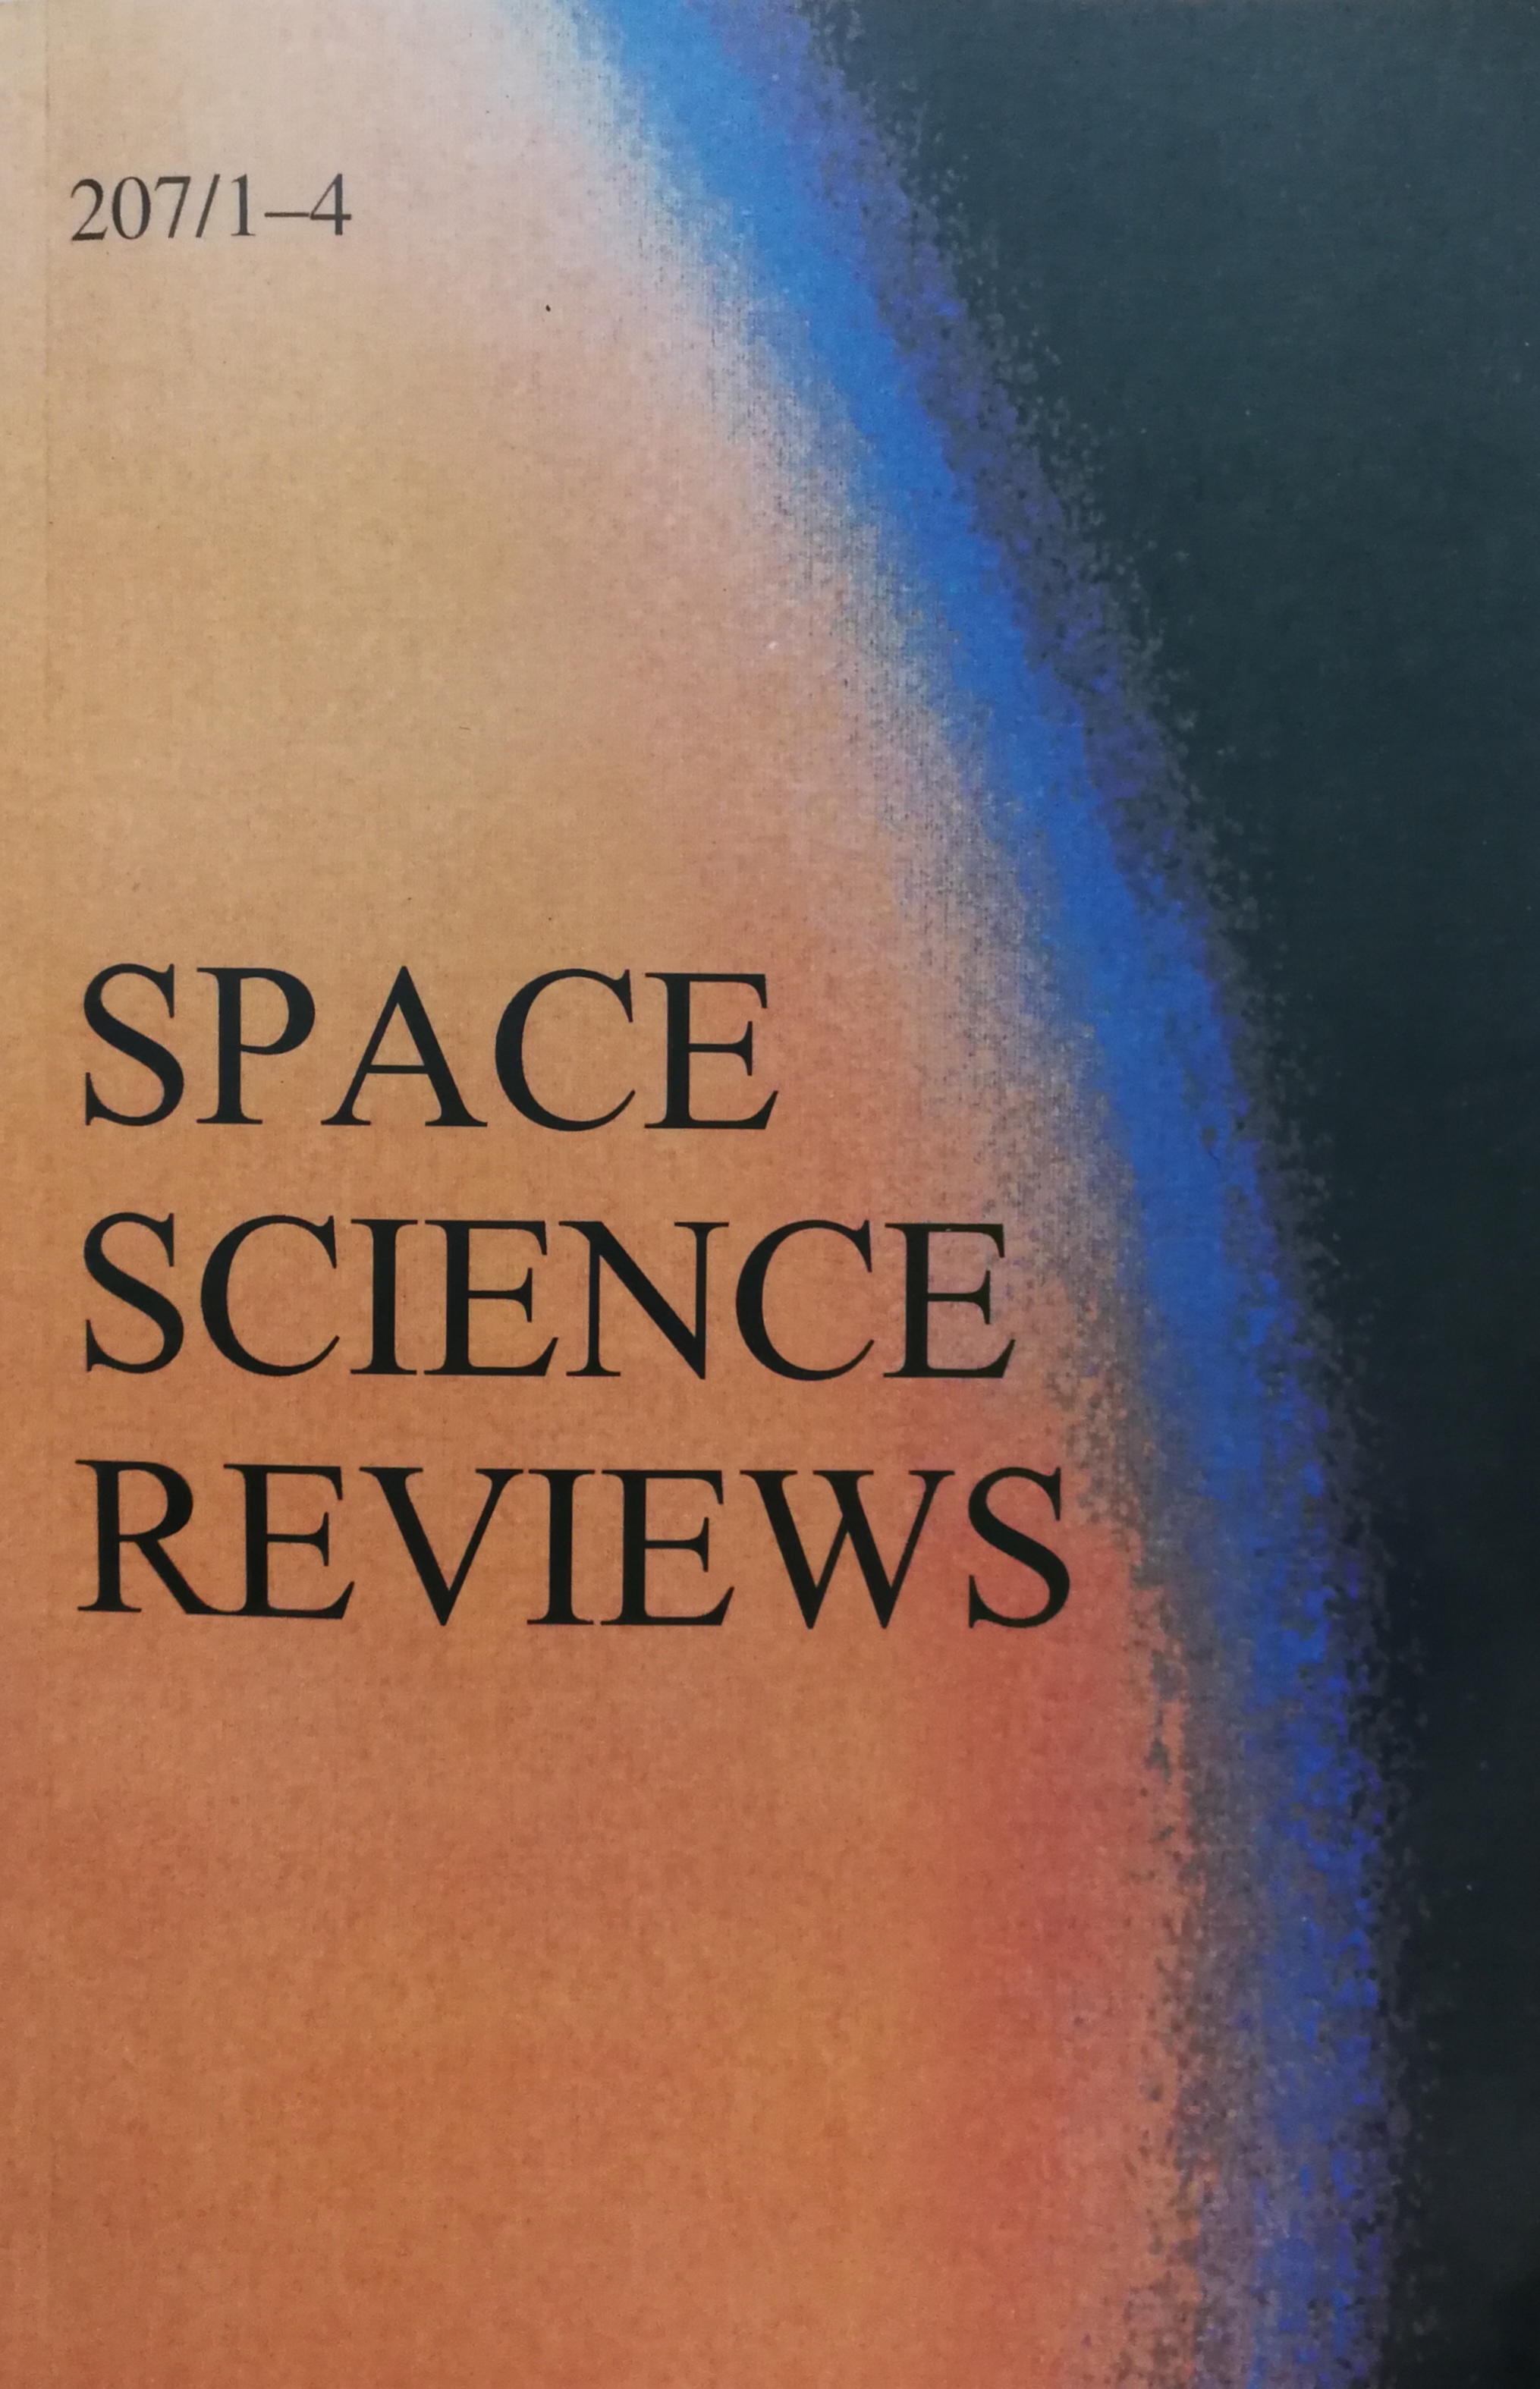 SPACE SCIENCE REVIEWS